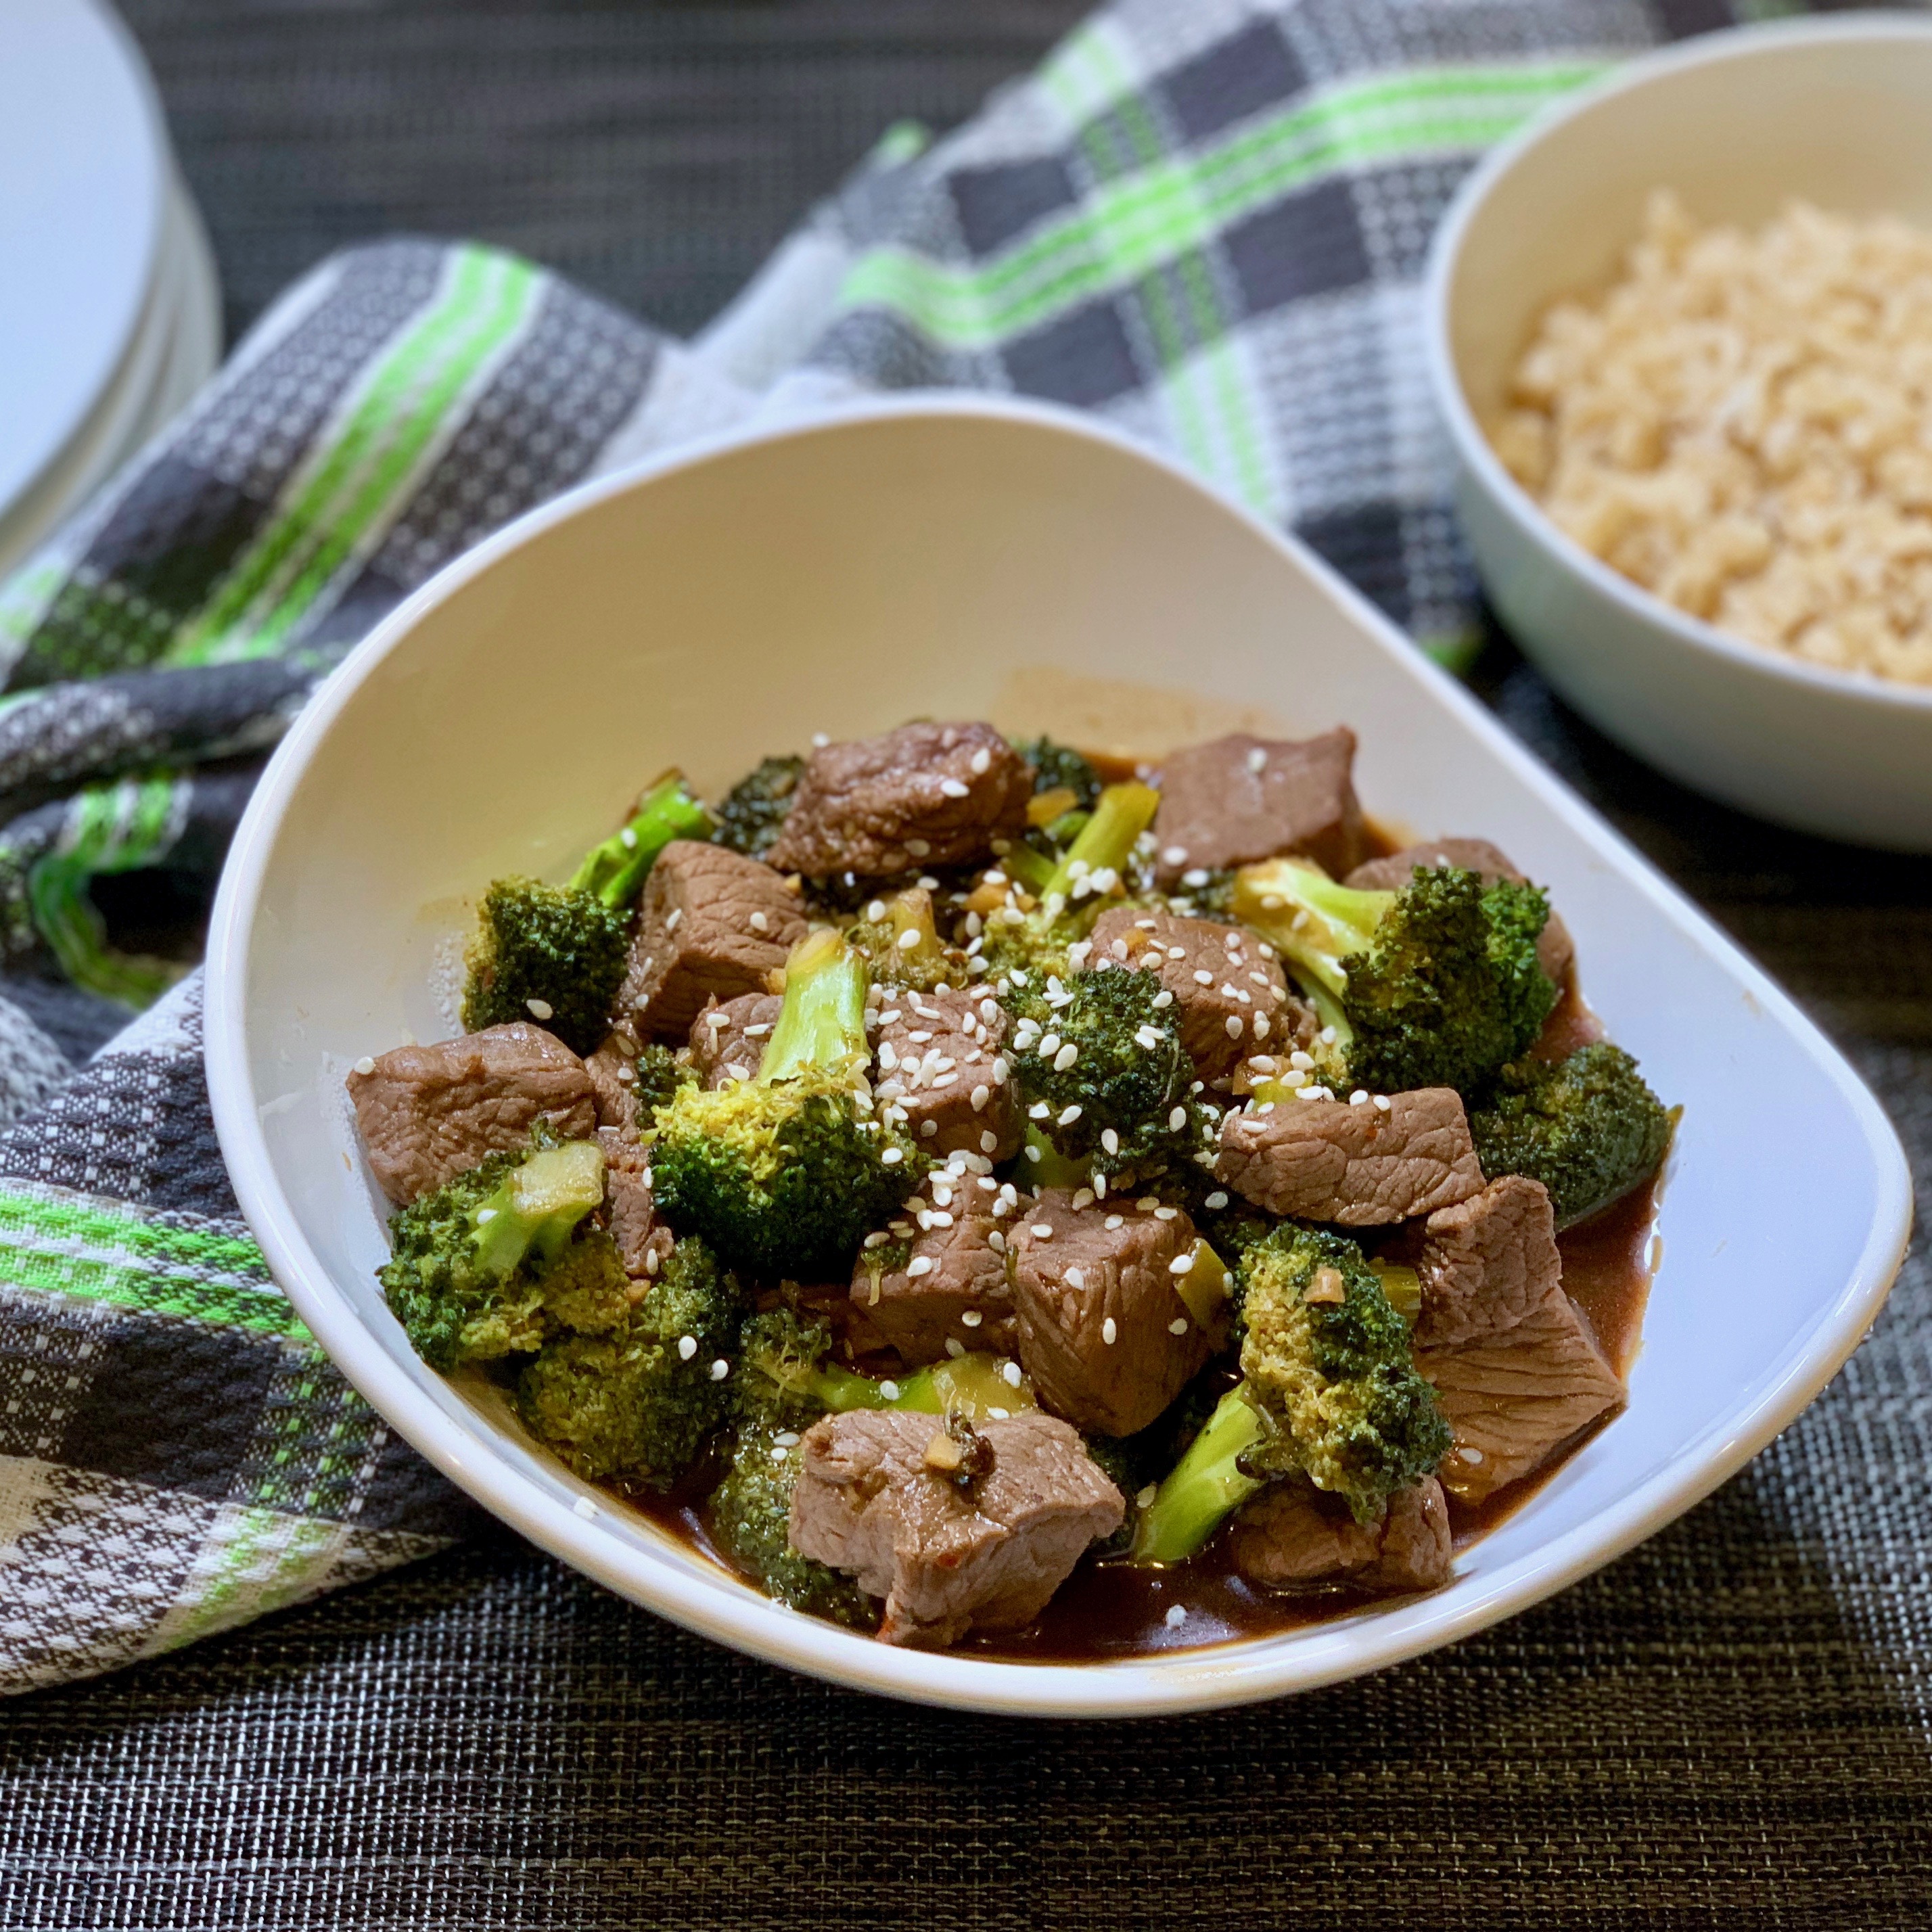 Protein and Veggies made tasty with this Healthy Beef and Broccoli Recipe